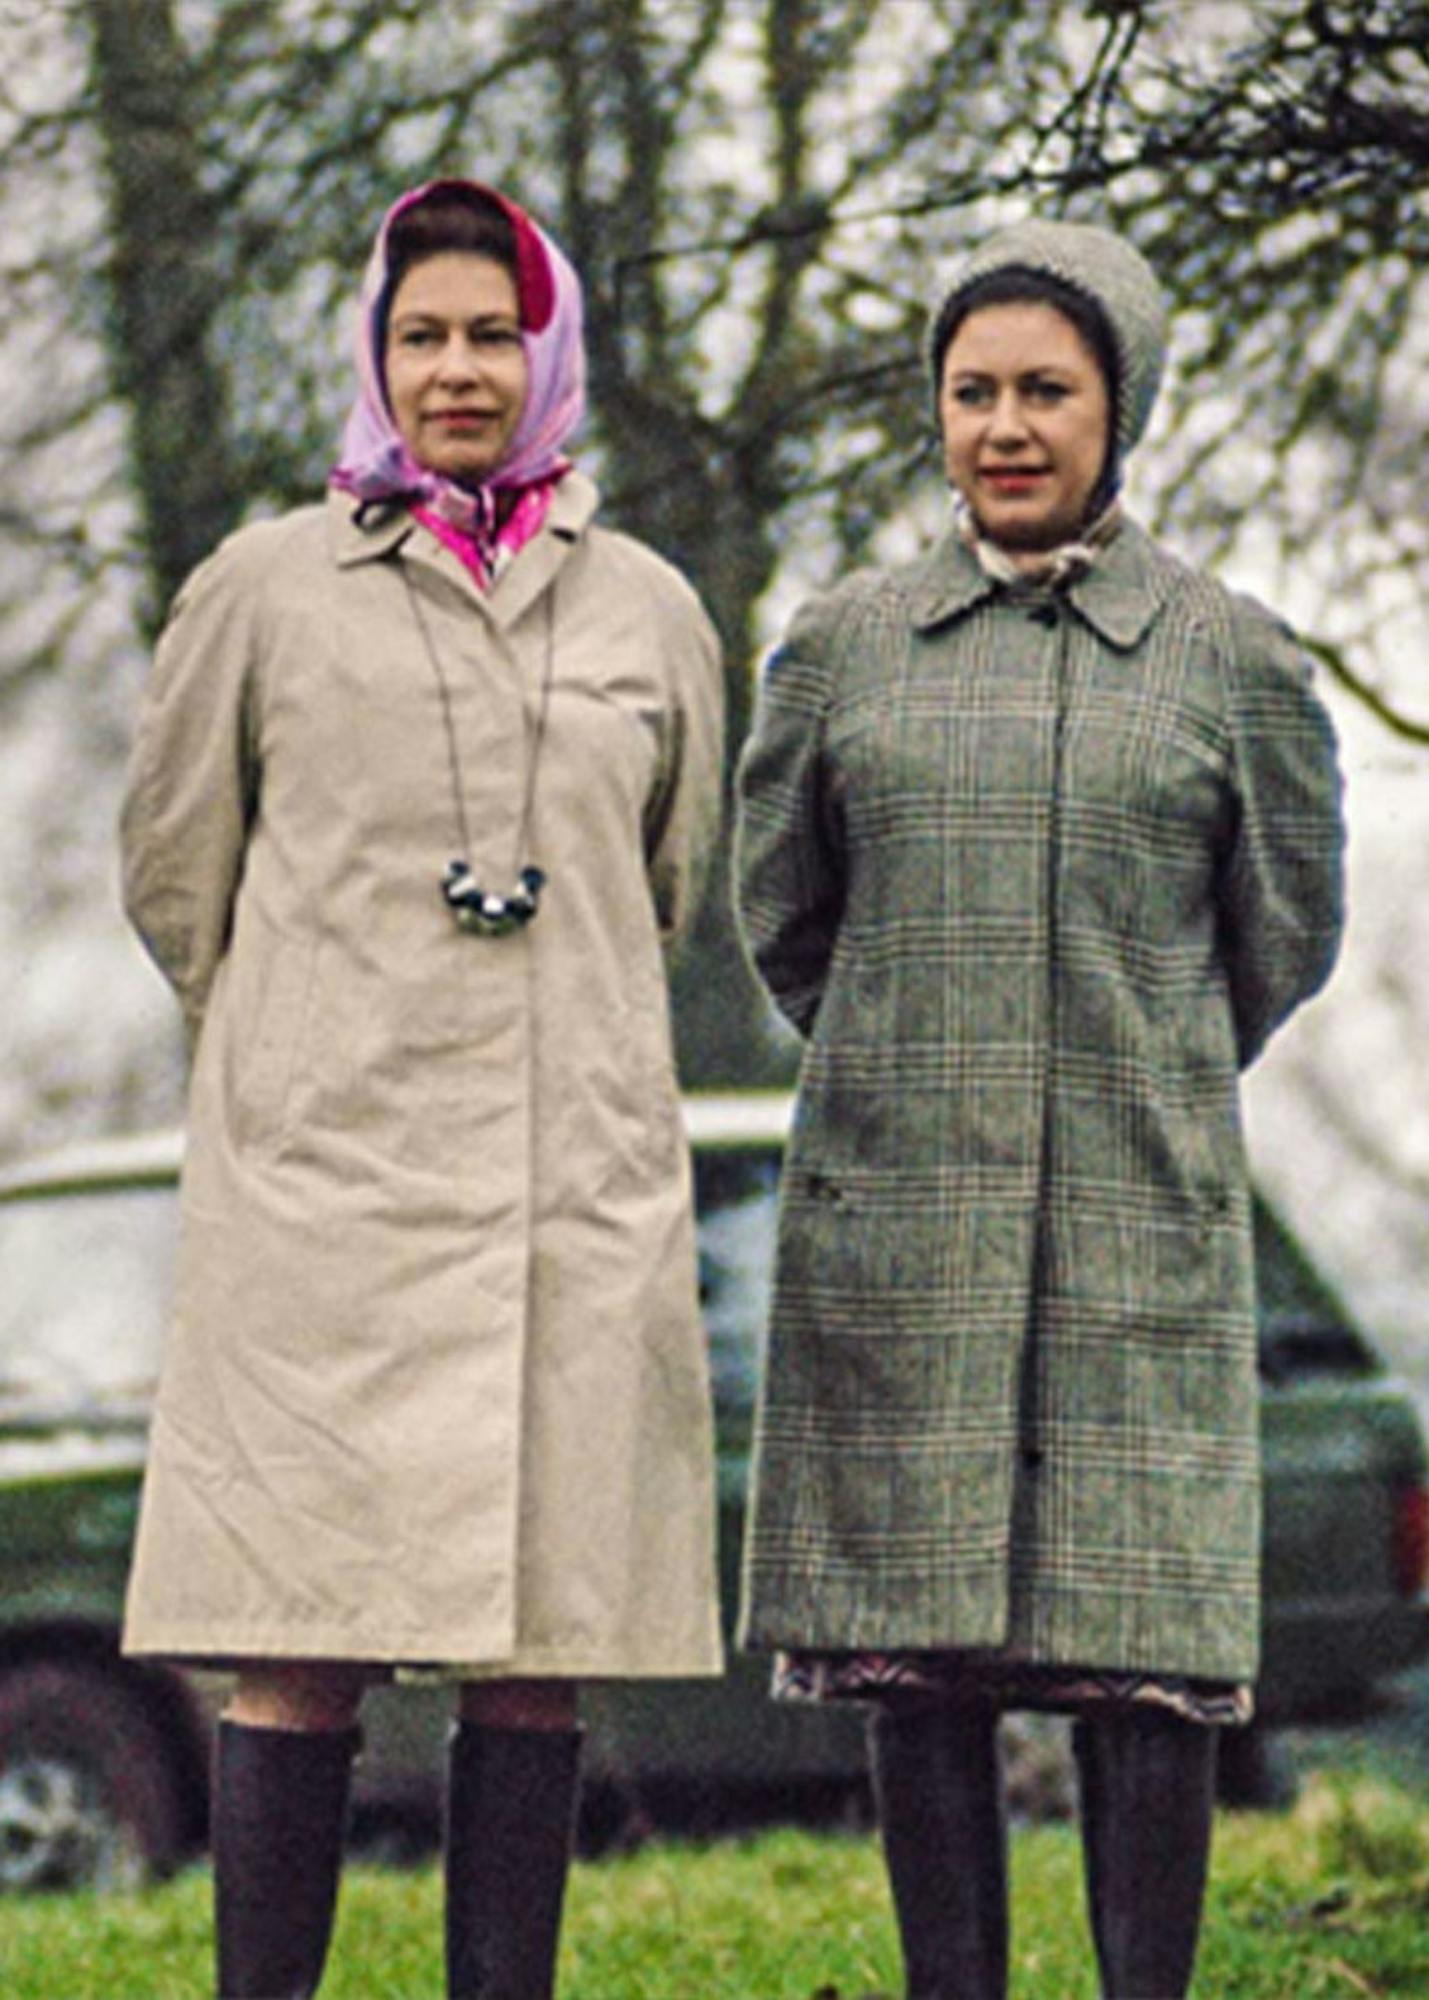 Queen Elizabeth inspo imagery with wellies